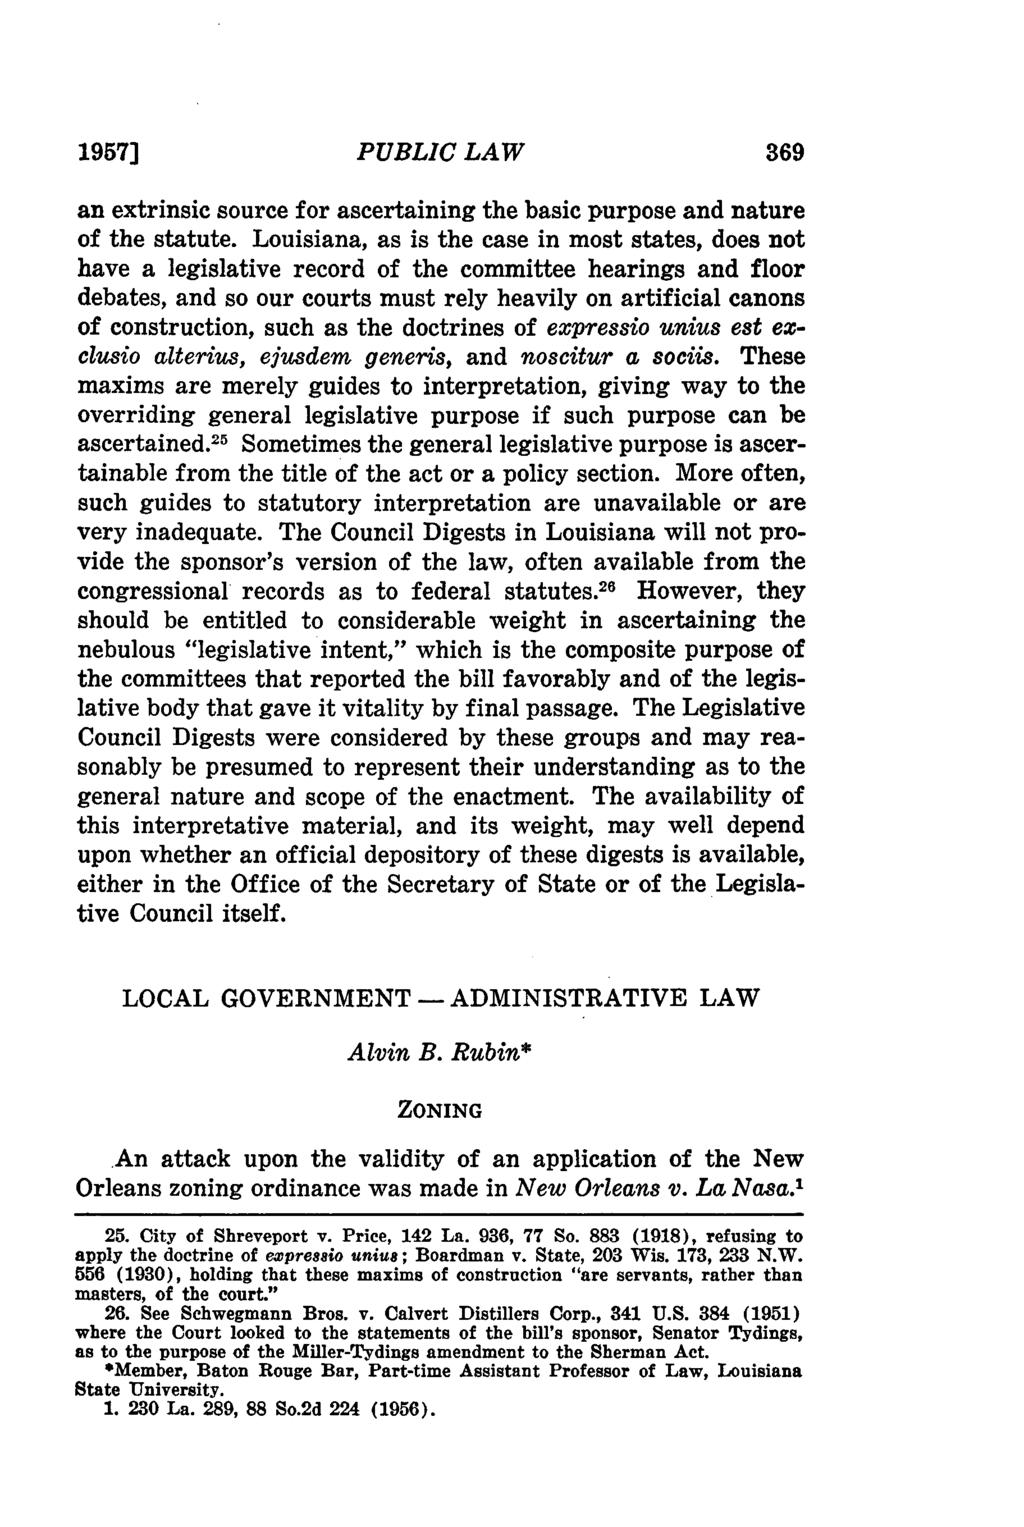 19571 PUBLIC LAW an extrinsic source for ascertaining the basic purpose and nature of the statute.